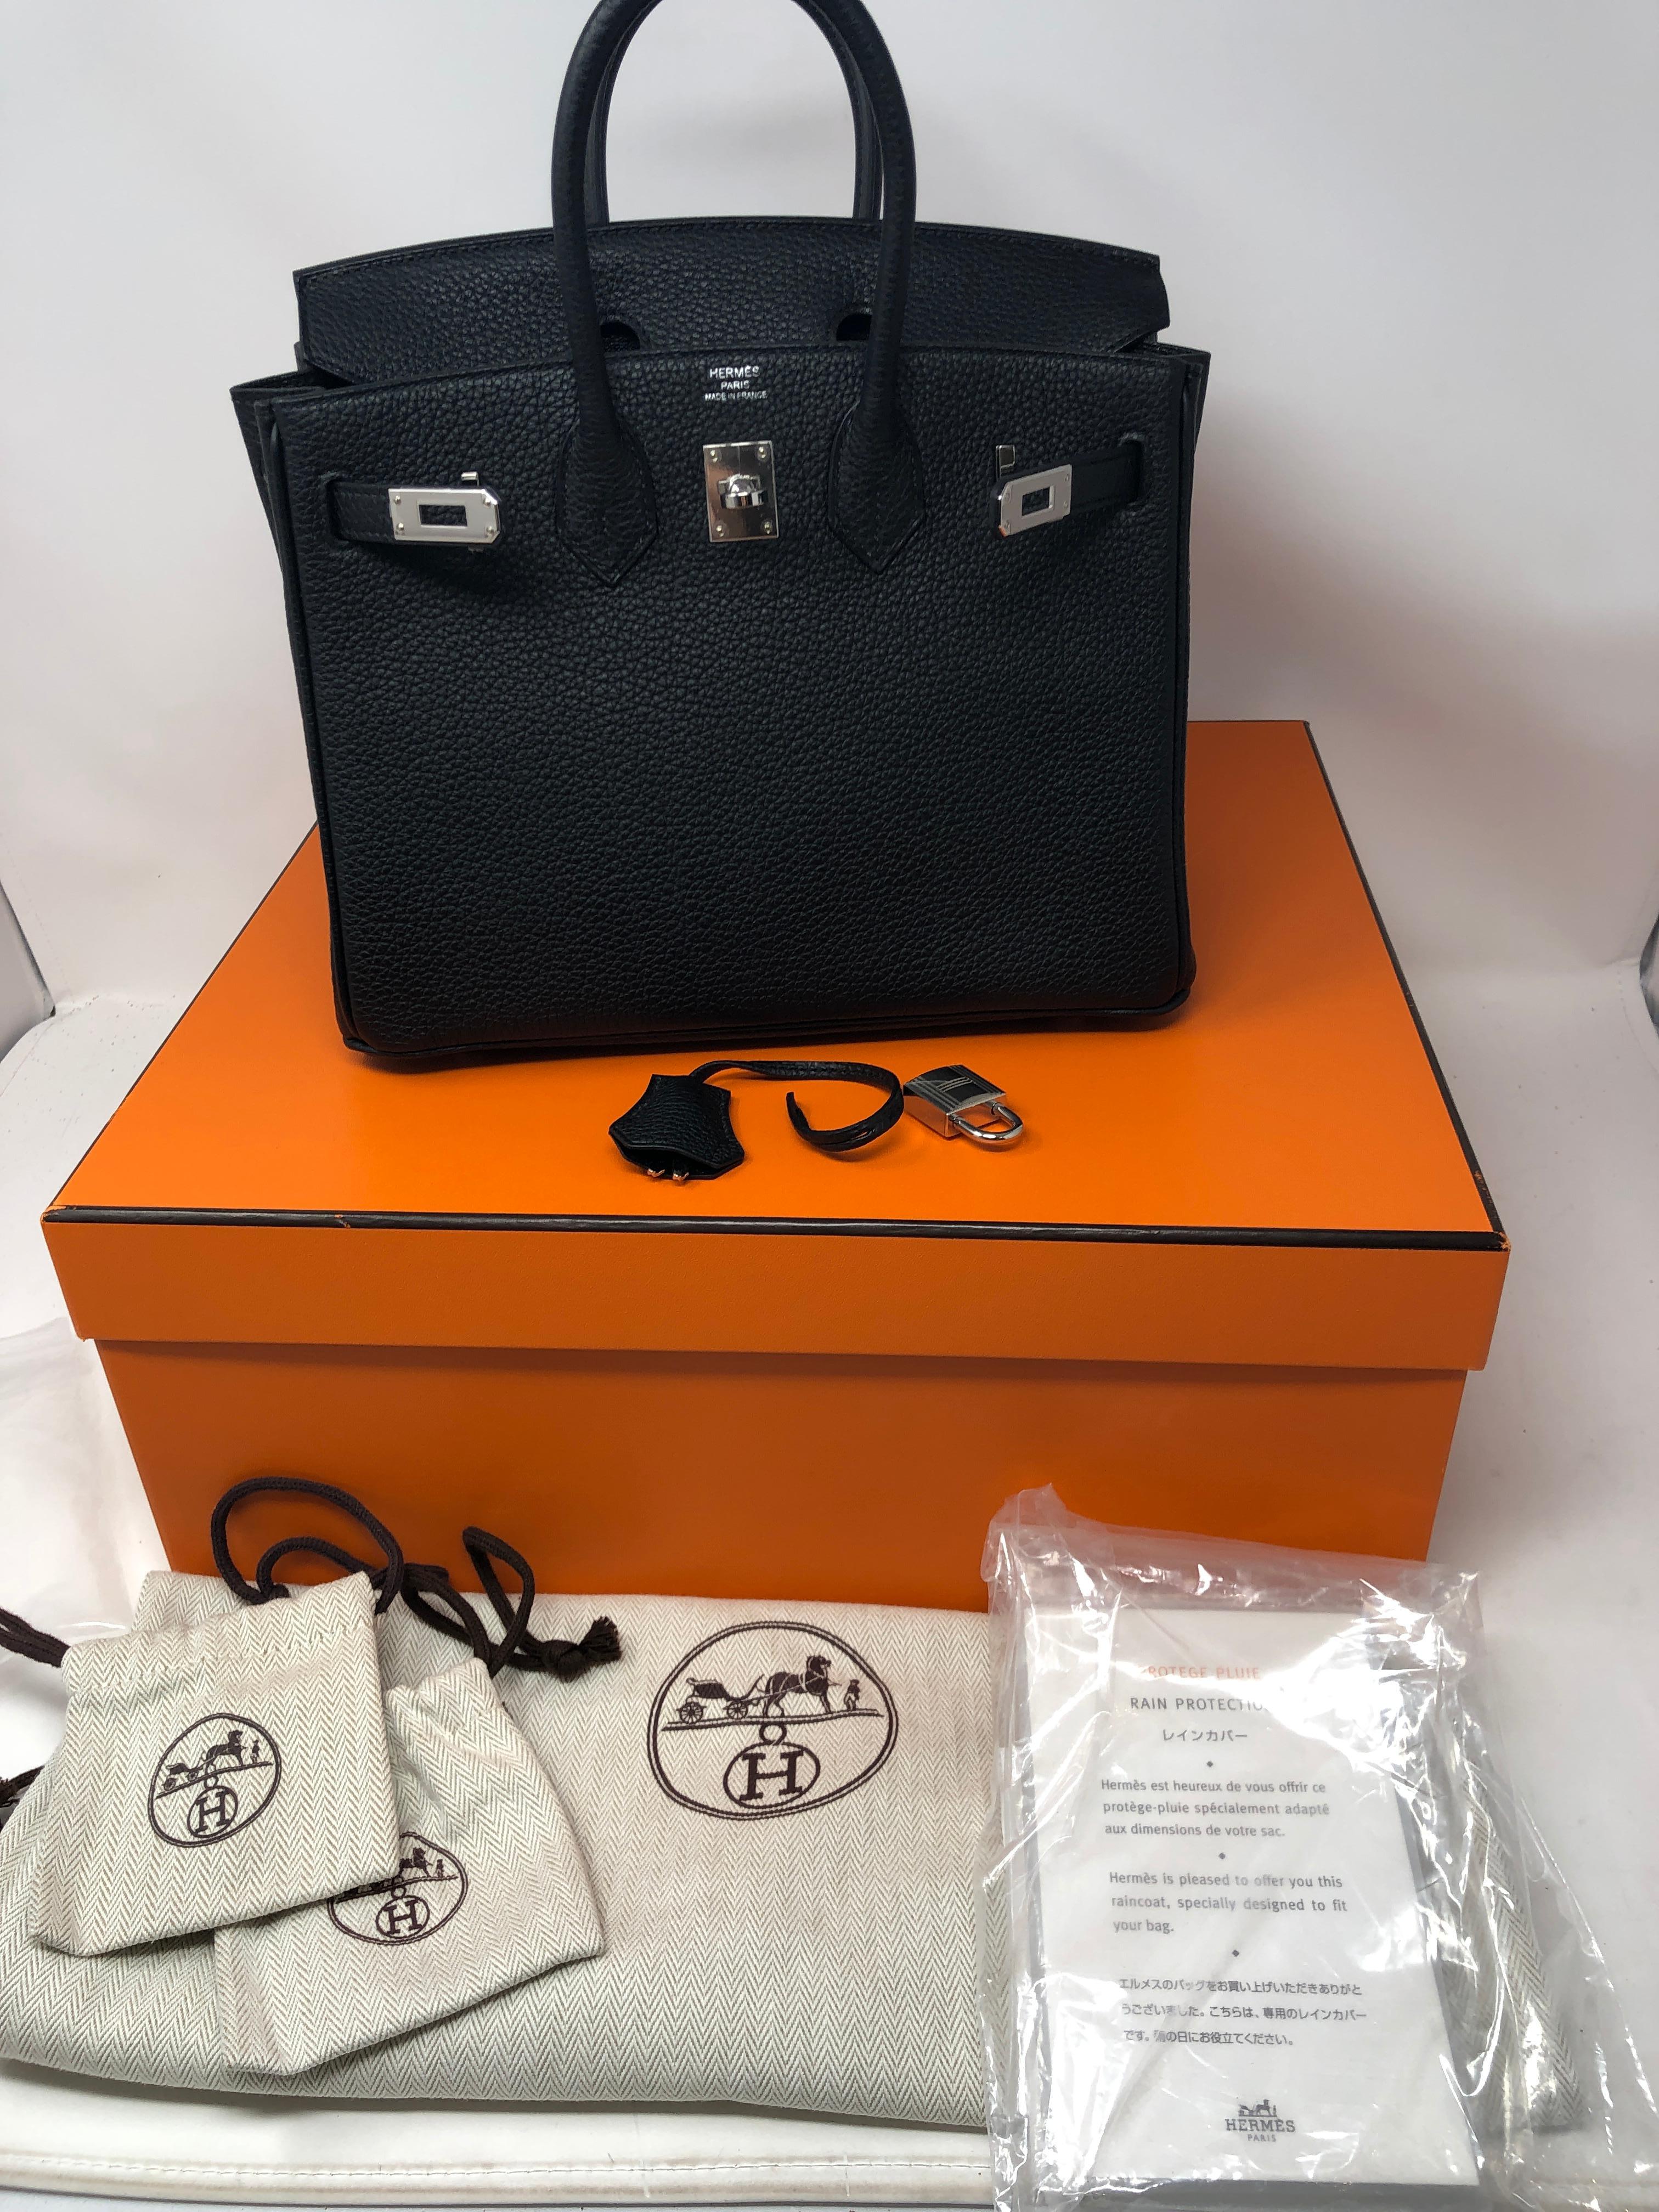 Hermes Black Birkin 25 Togo Leather. Palladium hardware. Like New Condition. Still has plastic on hardware. Own the Most Wanted Birkin of them all. The mini size 25. Extremely rare and hard to get size. Complete with Full set. Clochette, lock, keys,